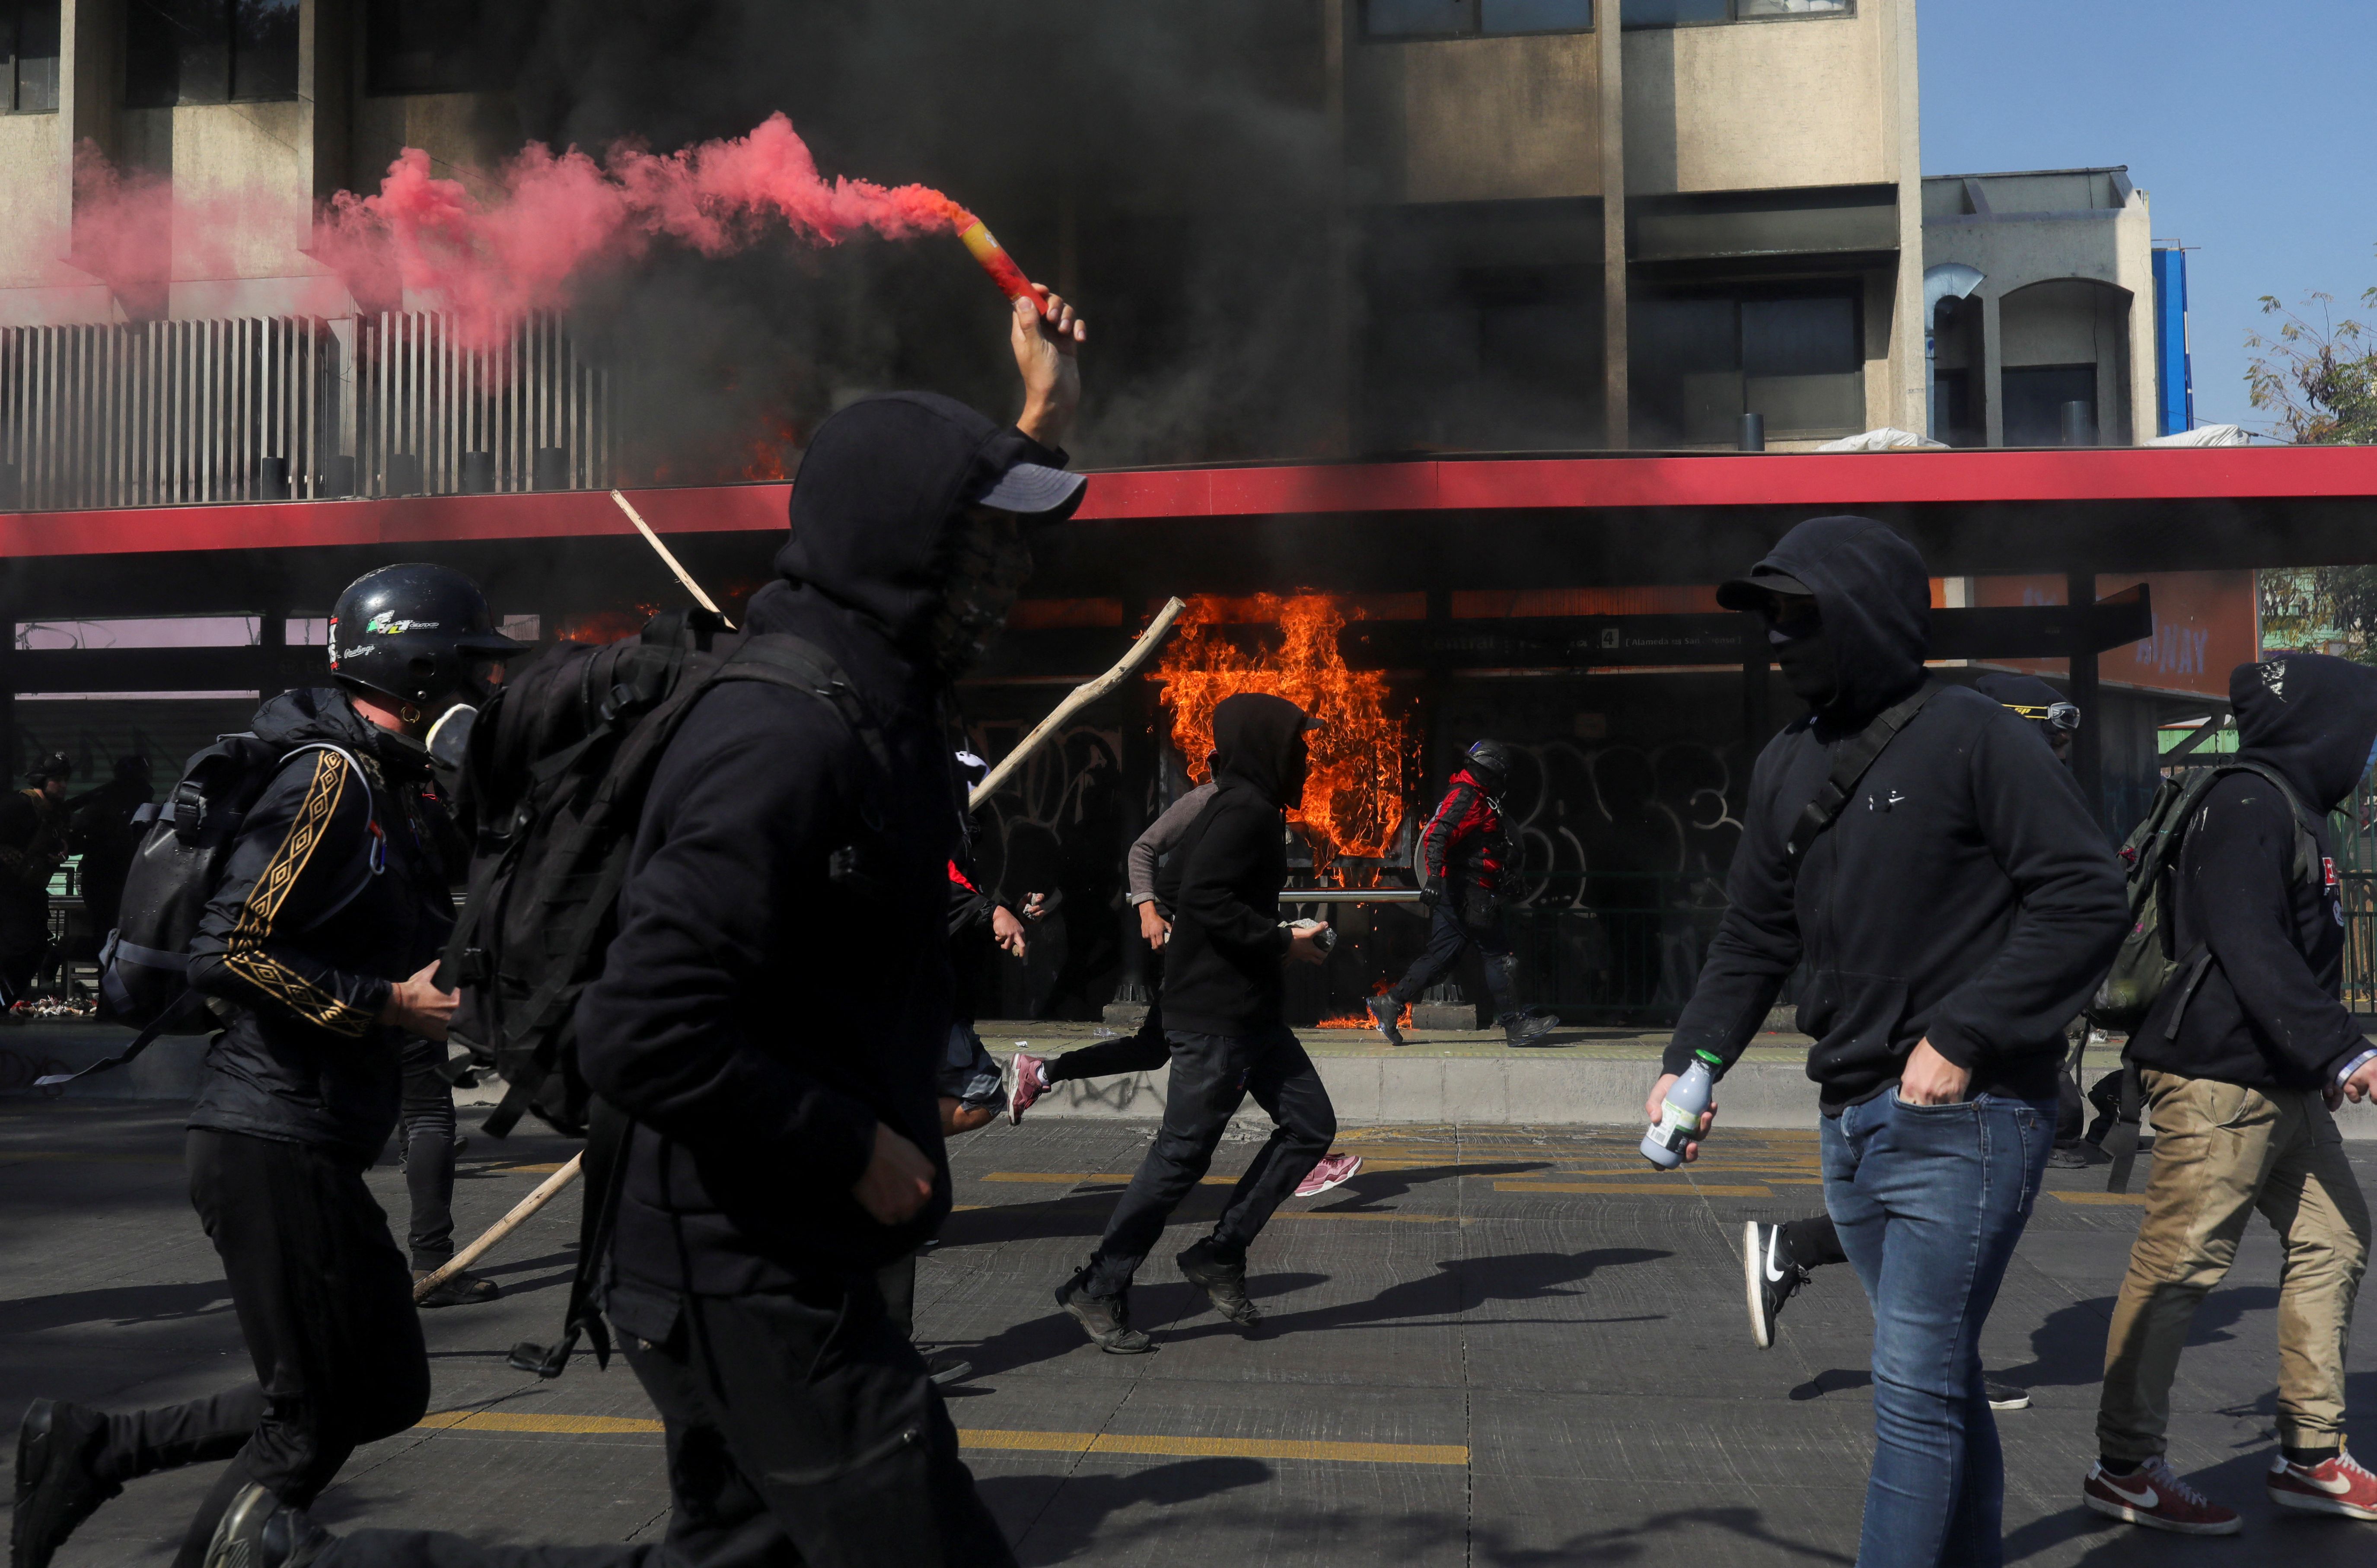 Fire burns at a bus stop as protesters run during the May Day demonstration in Santiago, Chile.